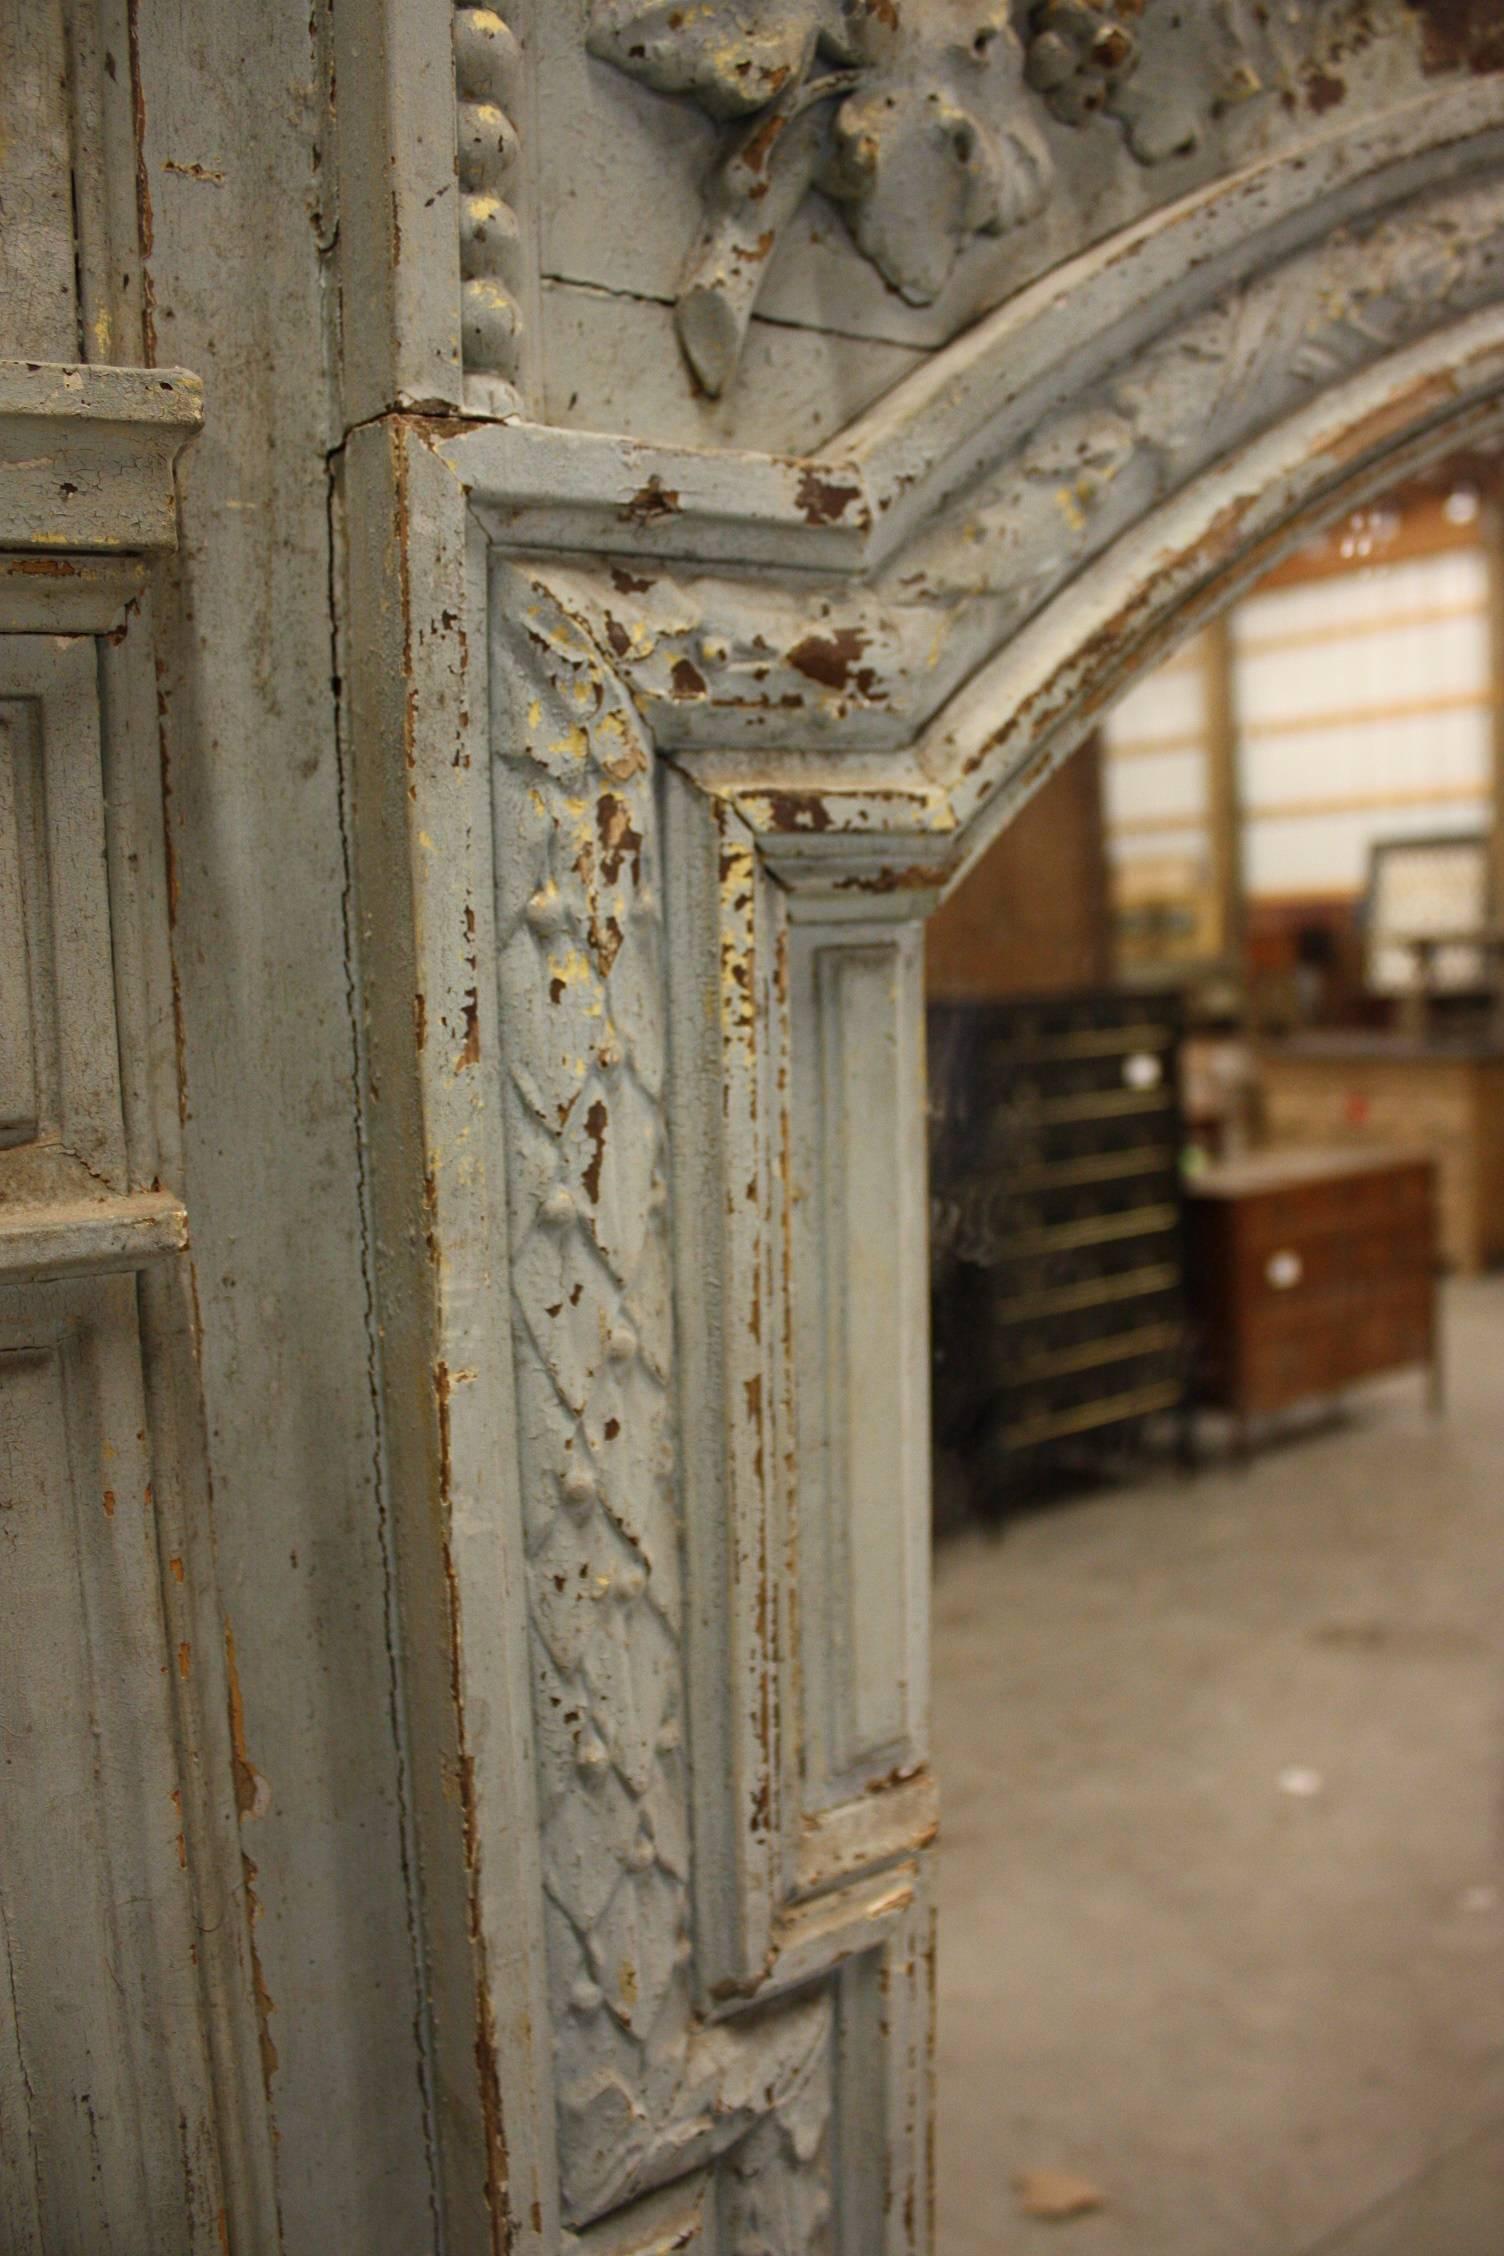 Stunning antique French mirror. Painstakingly dry-scrapped taking many hours, to reveal the beautiful layers of paint over the years.